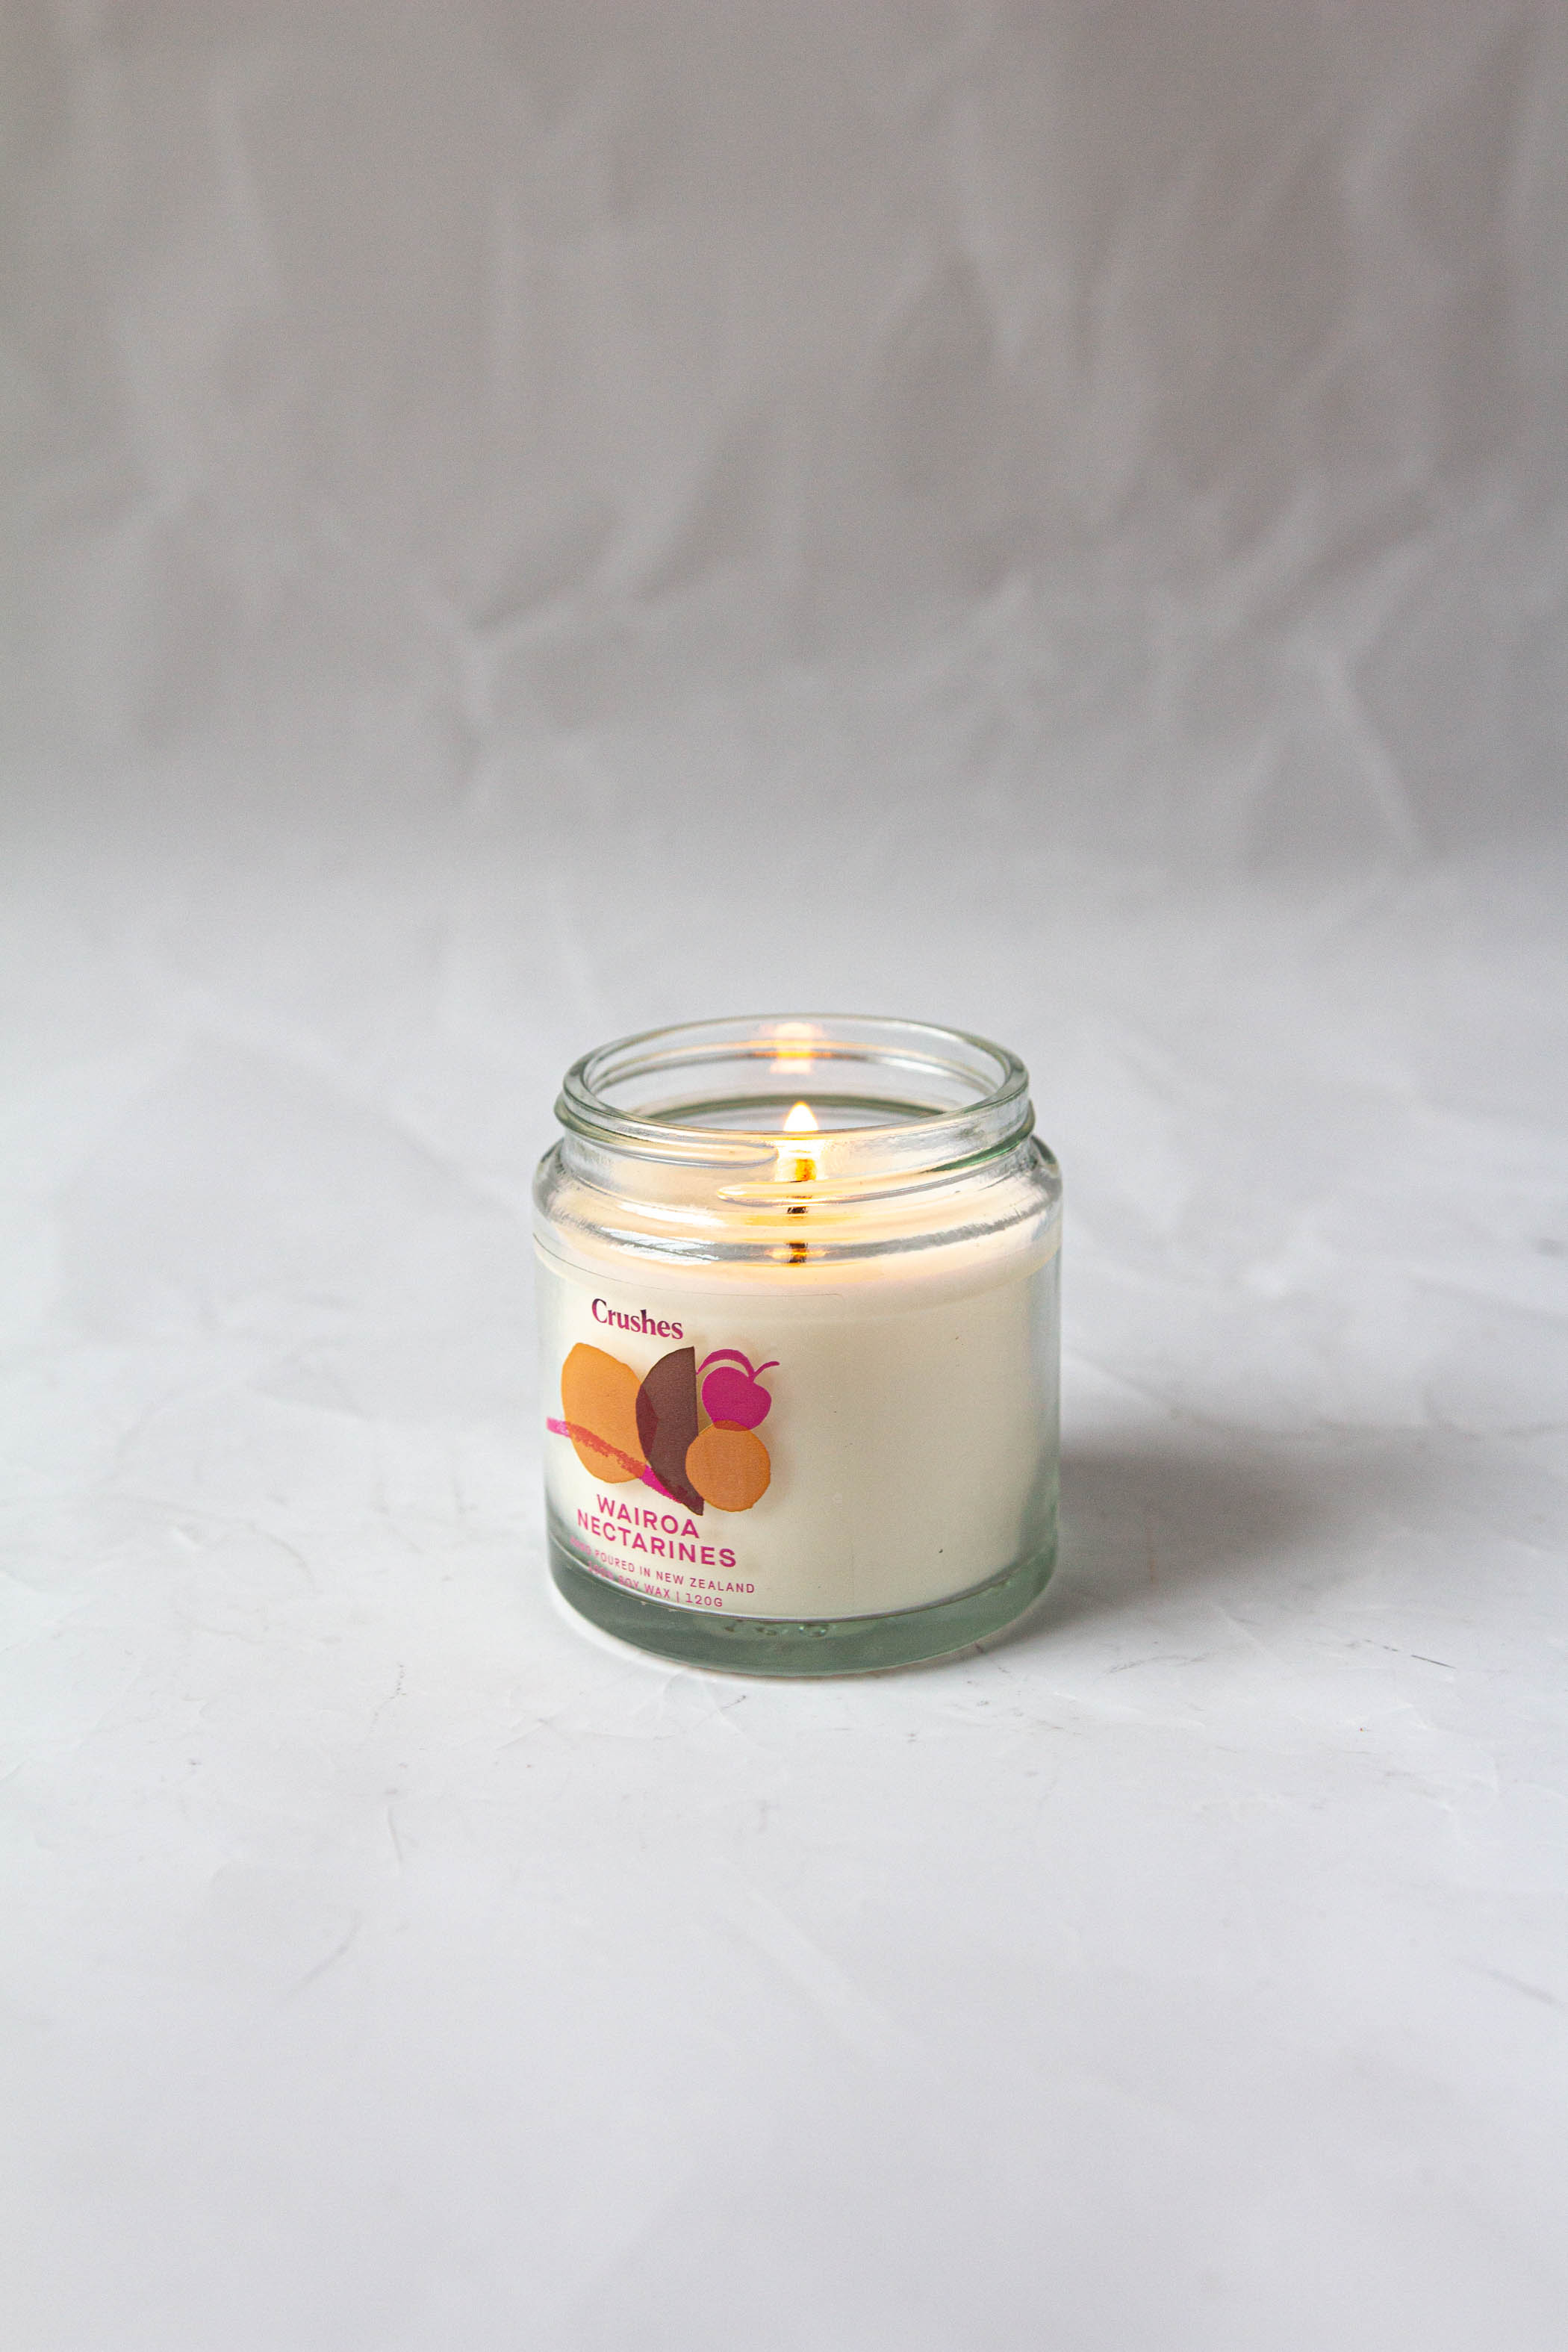 Wairoa Nectarines Scented Soy Candle